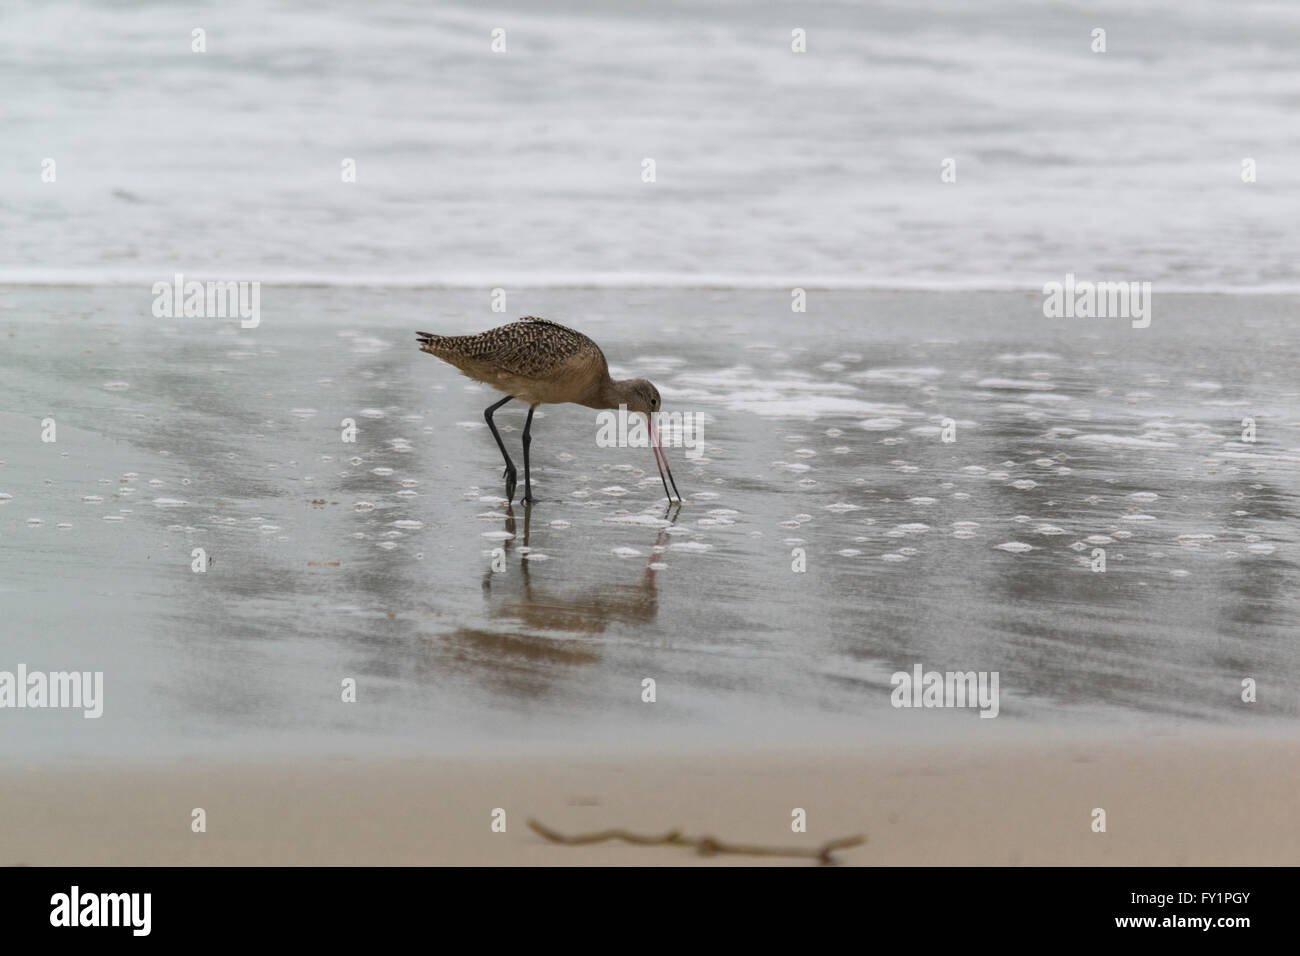 Marbled Godwit, a large shorebird with upward curved bill probing the sand in Huntington Beach, California. Stock Photo